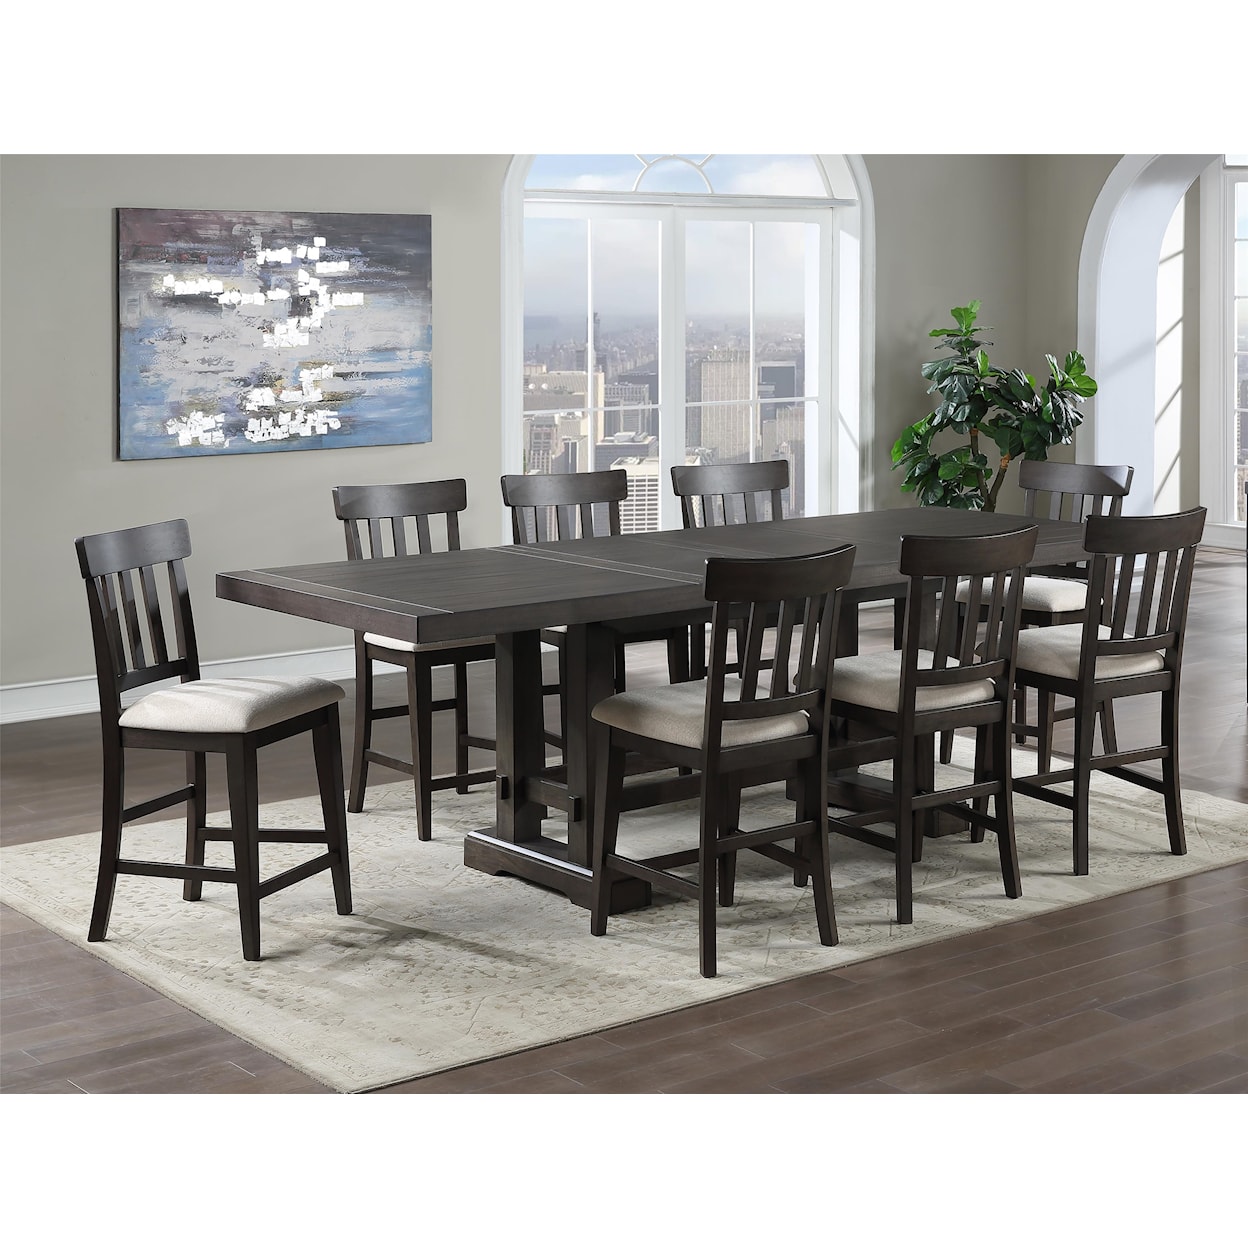 Steve Silver Napa 9-Piece Counter Height Dining Set